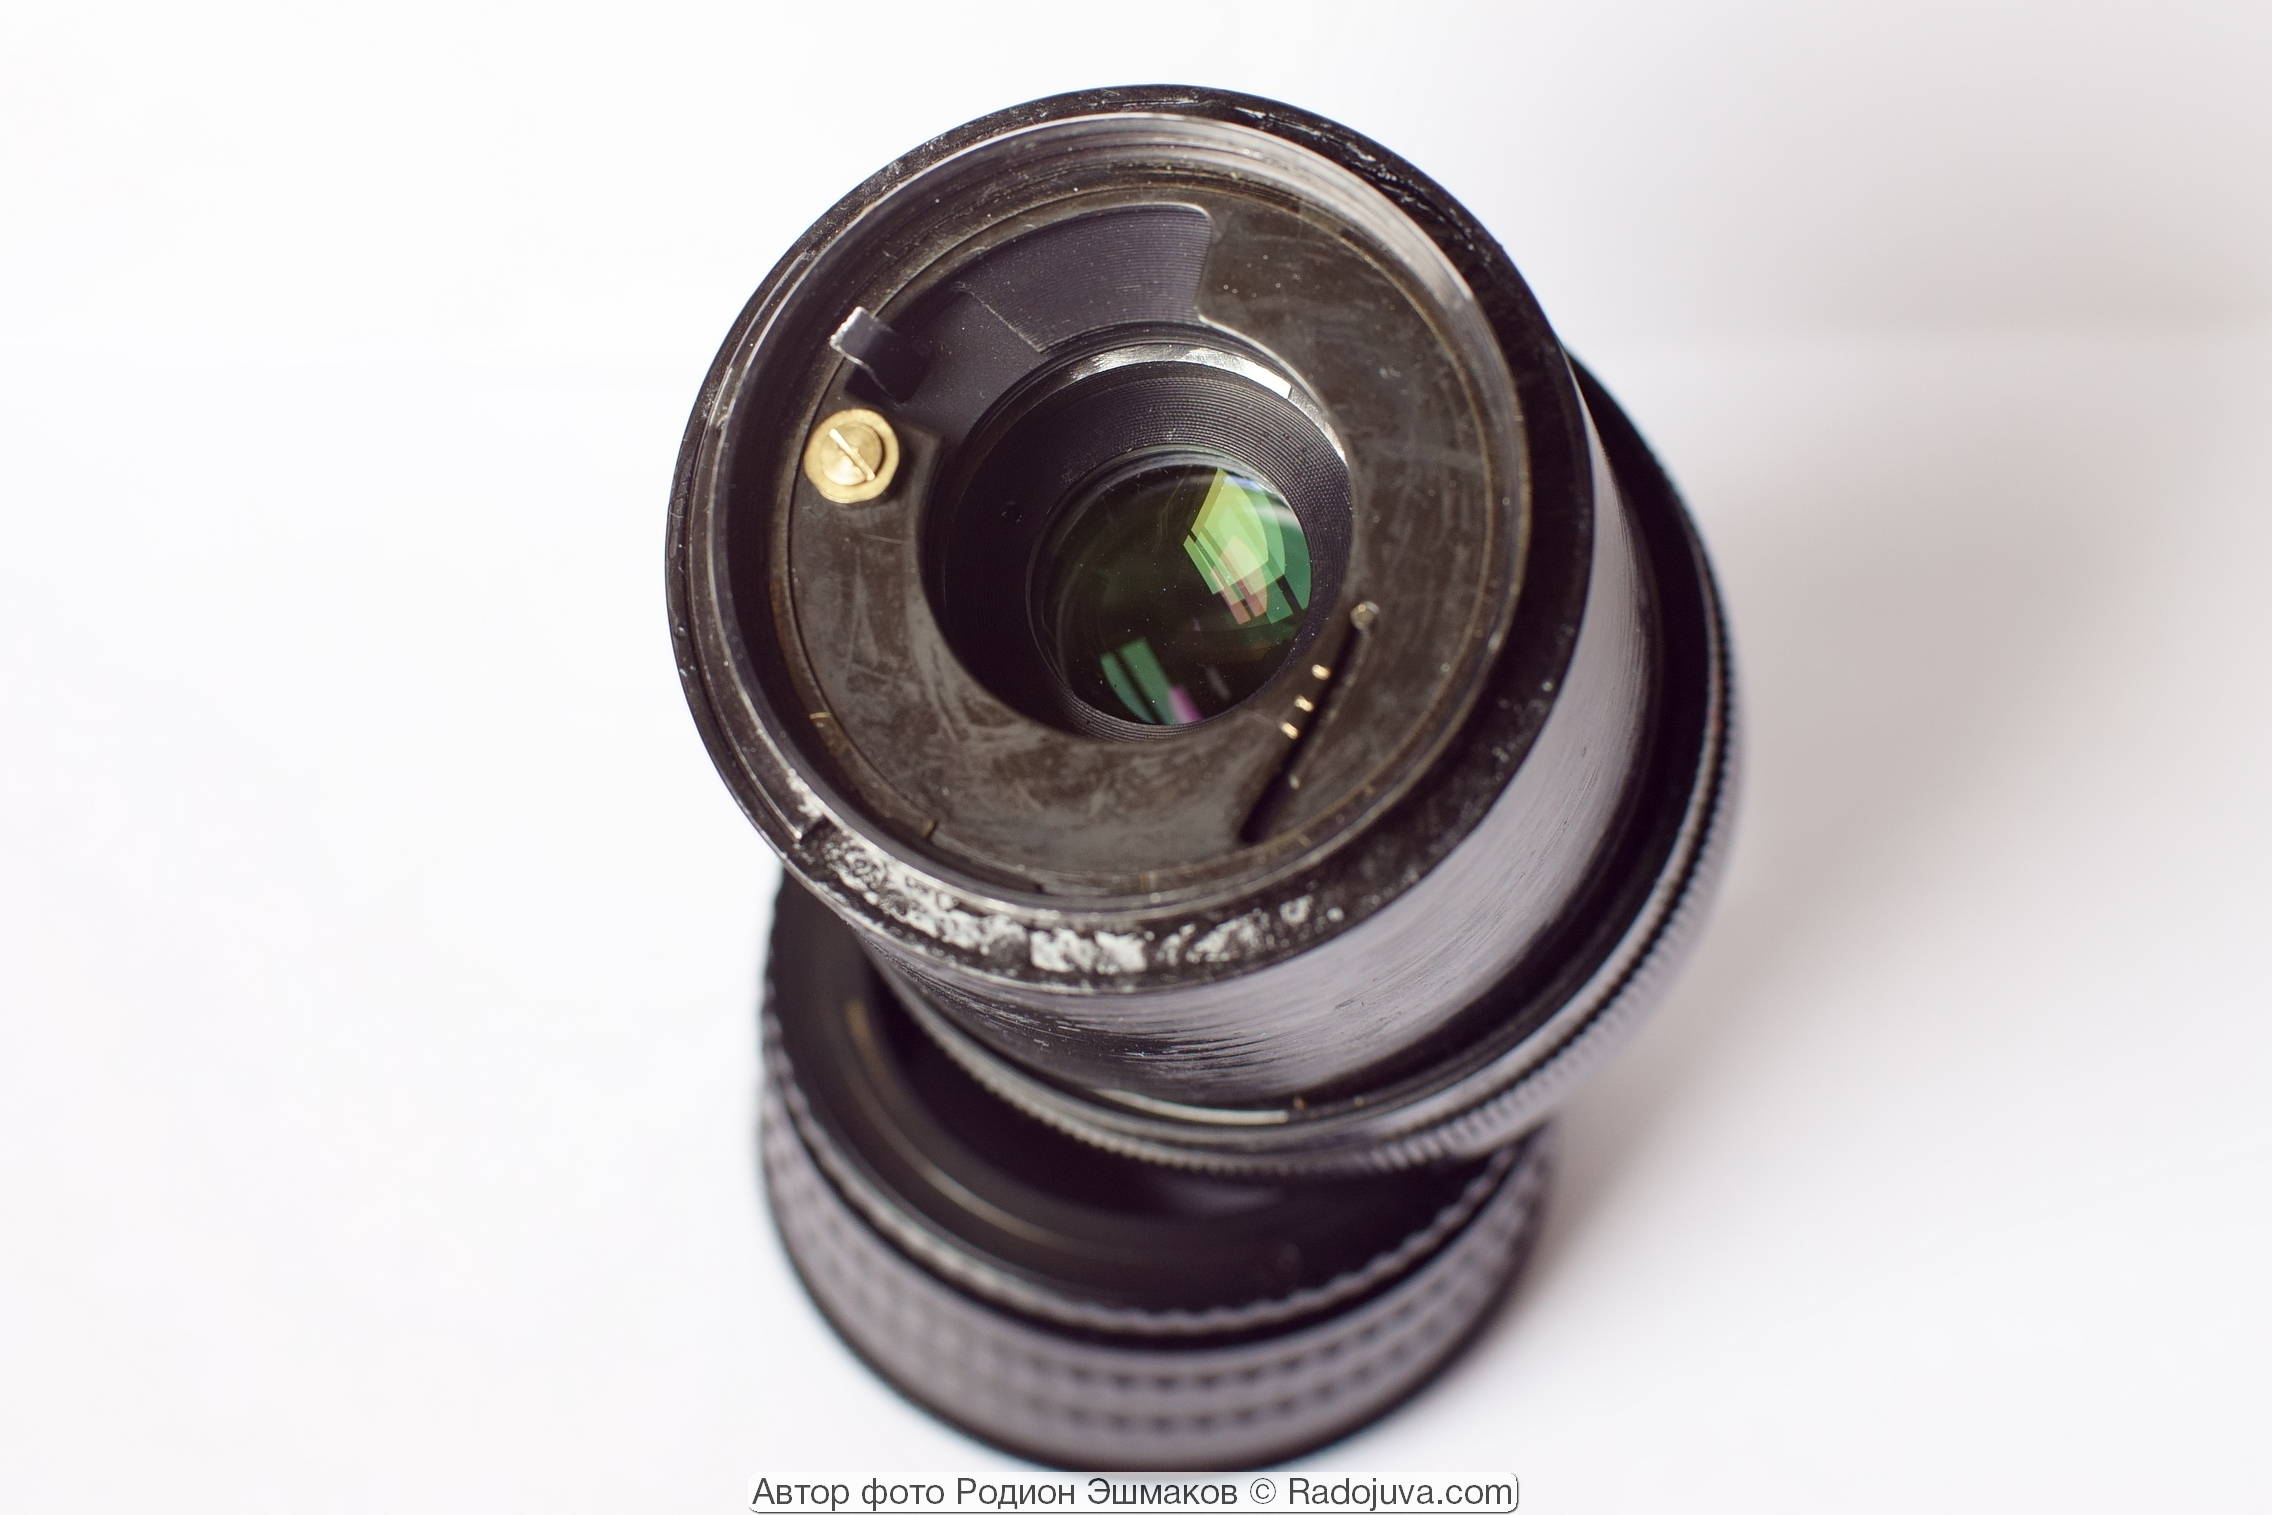 The lens after adaptation has nothing in common externally with the previous appearance.